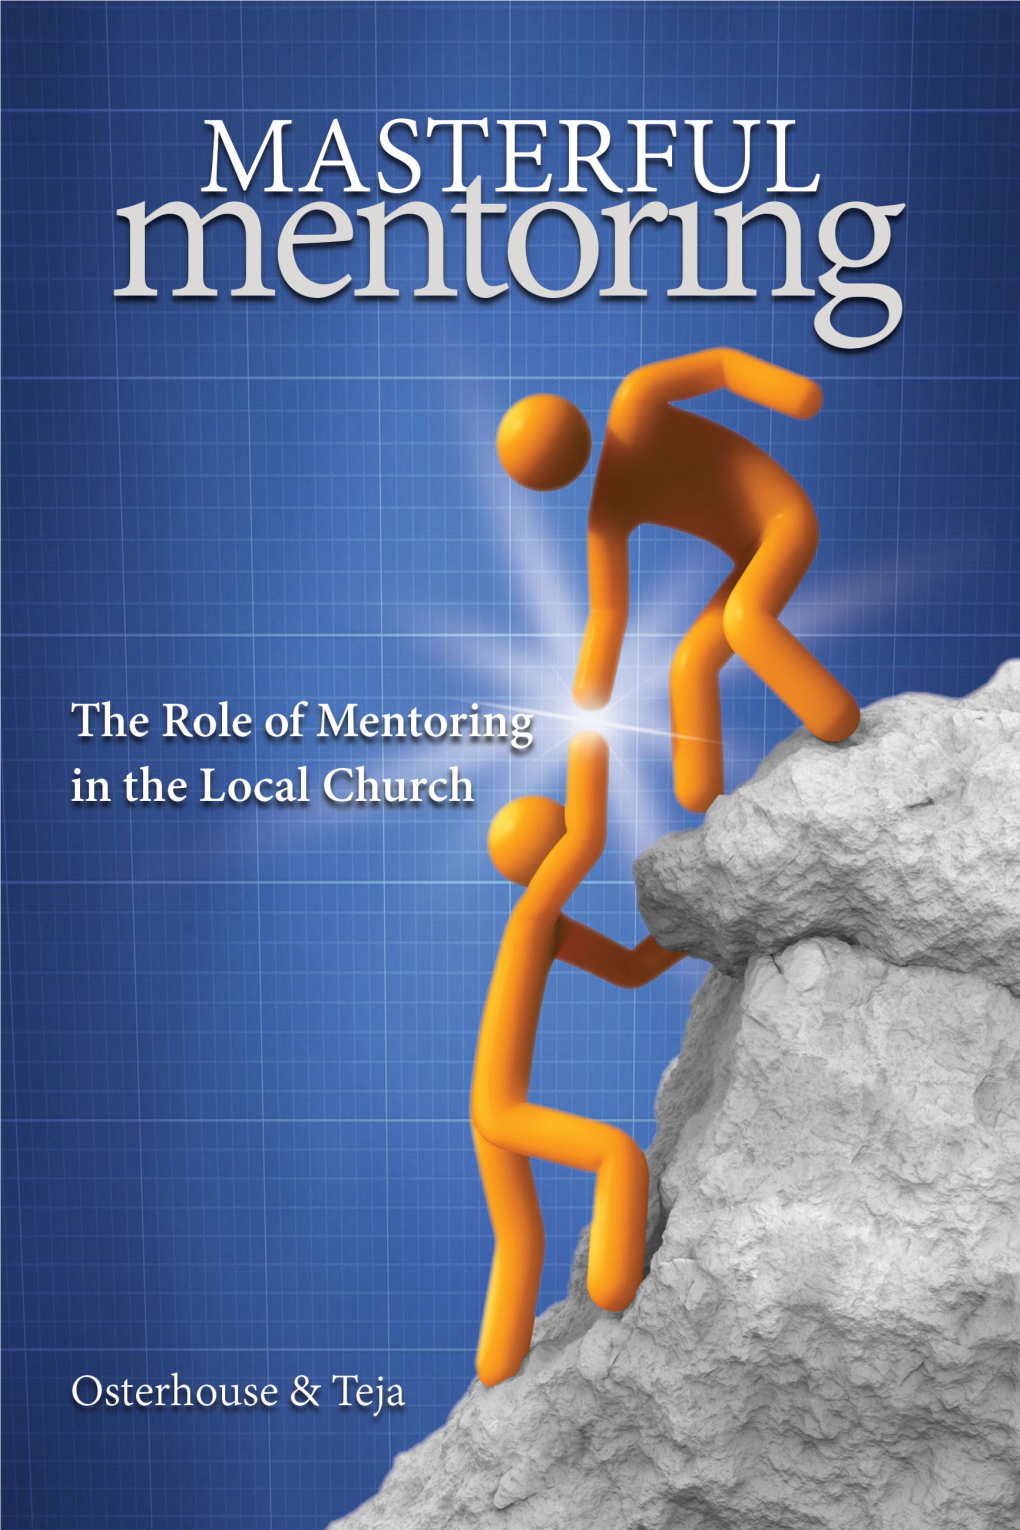 MASTERFUL MENTORING the Role of Mentoring in the Local Church